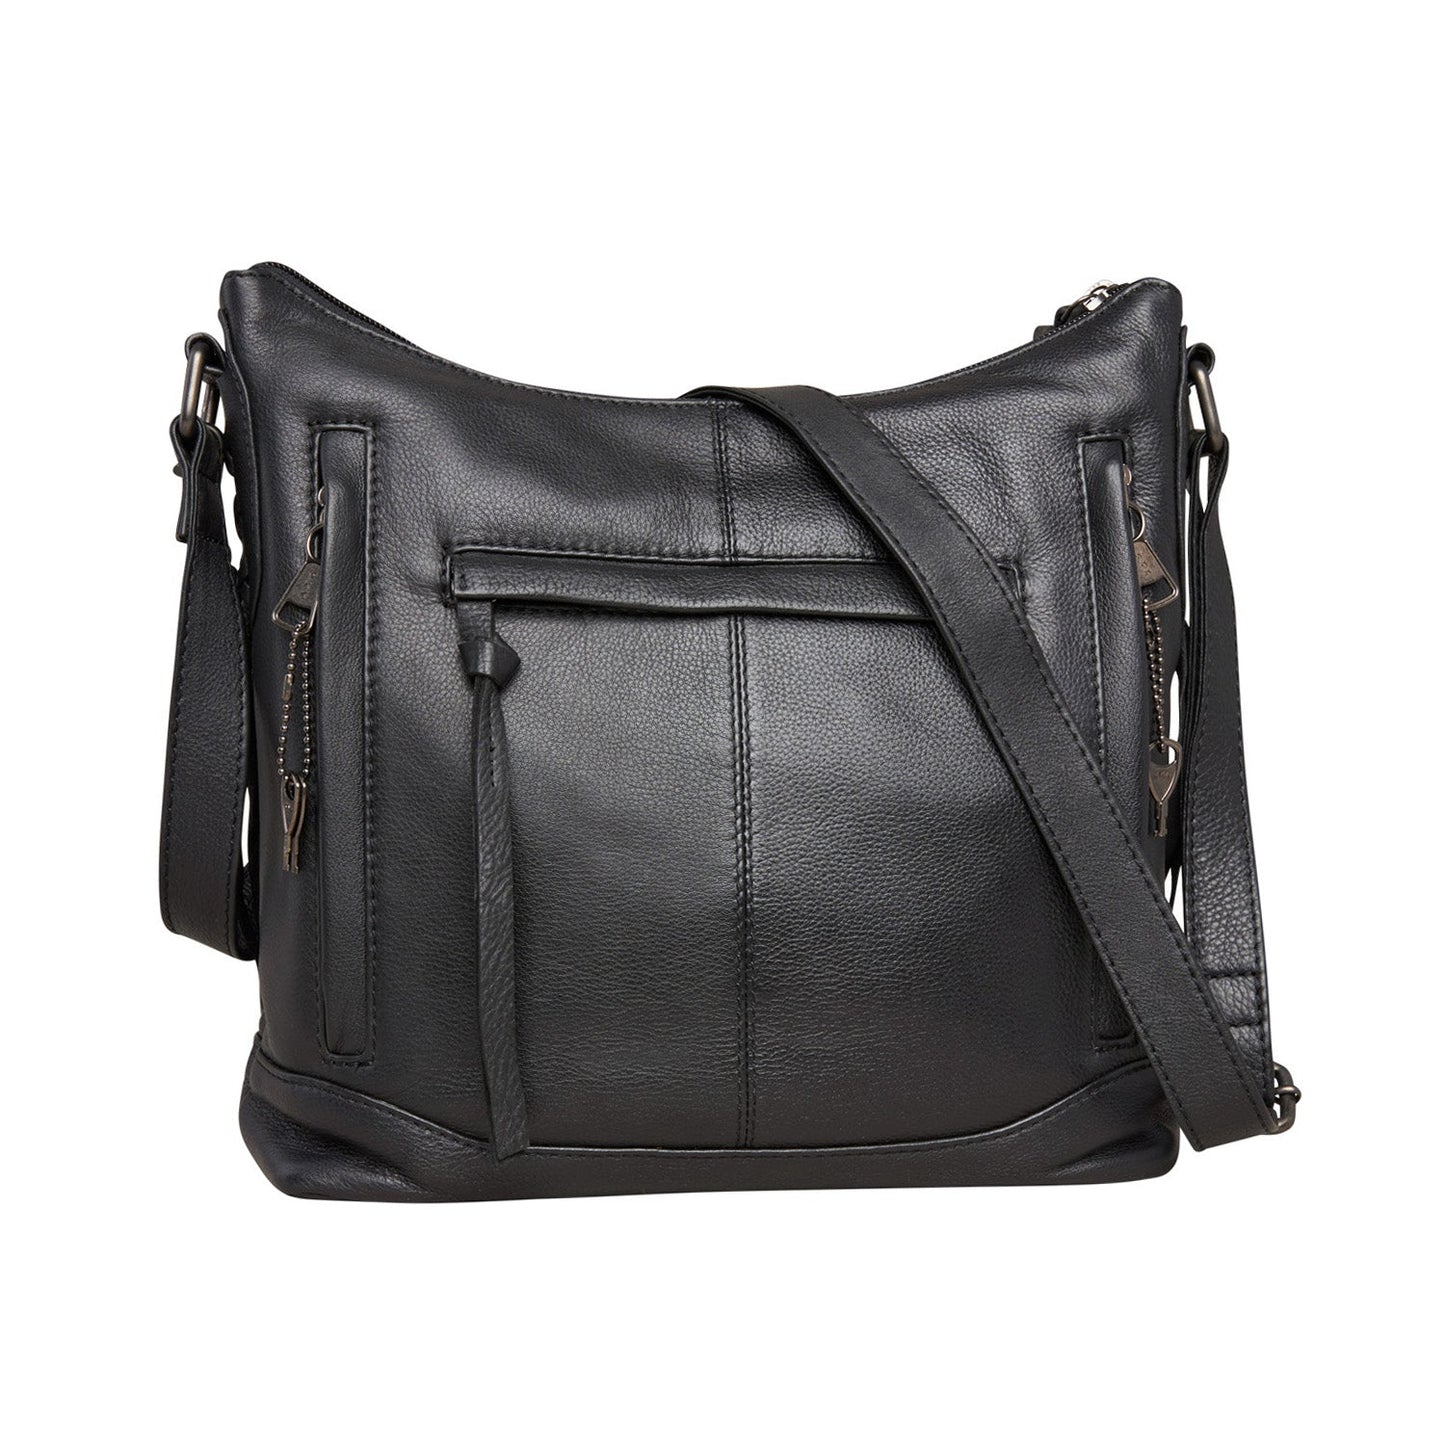 New Blake Cute Concealed Carry Scooped Leather Crossbody Purse by Lady Conceal - Hiding Hilda, LLC